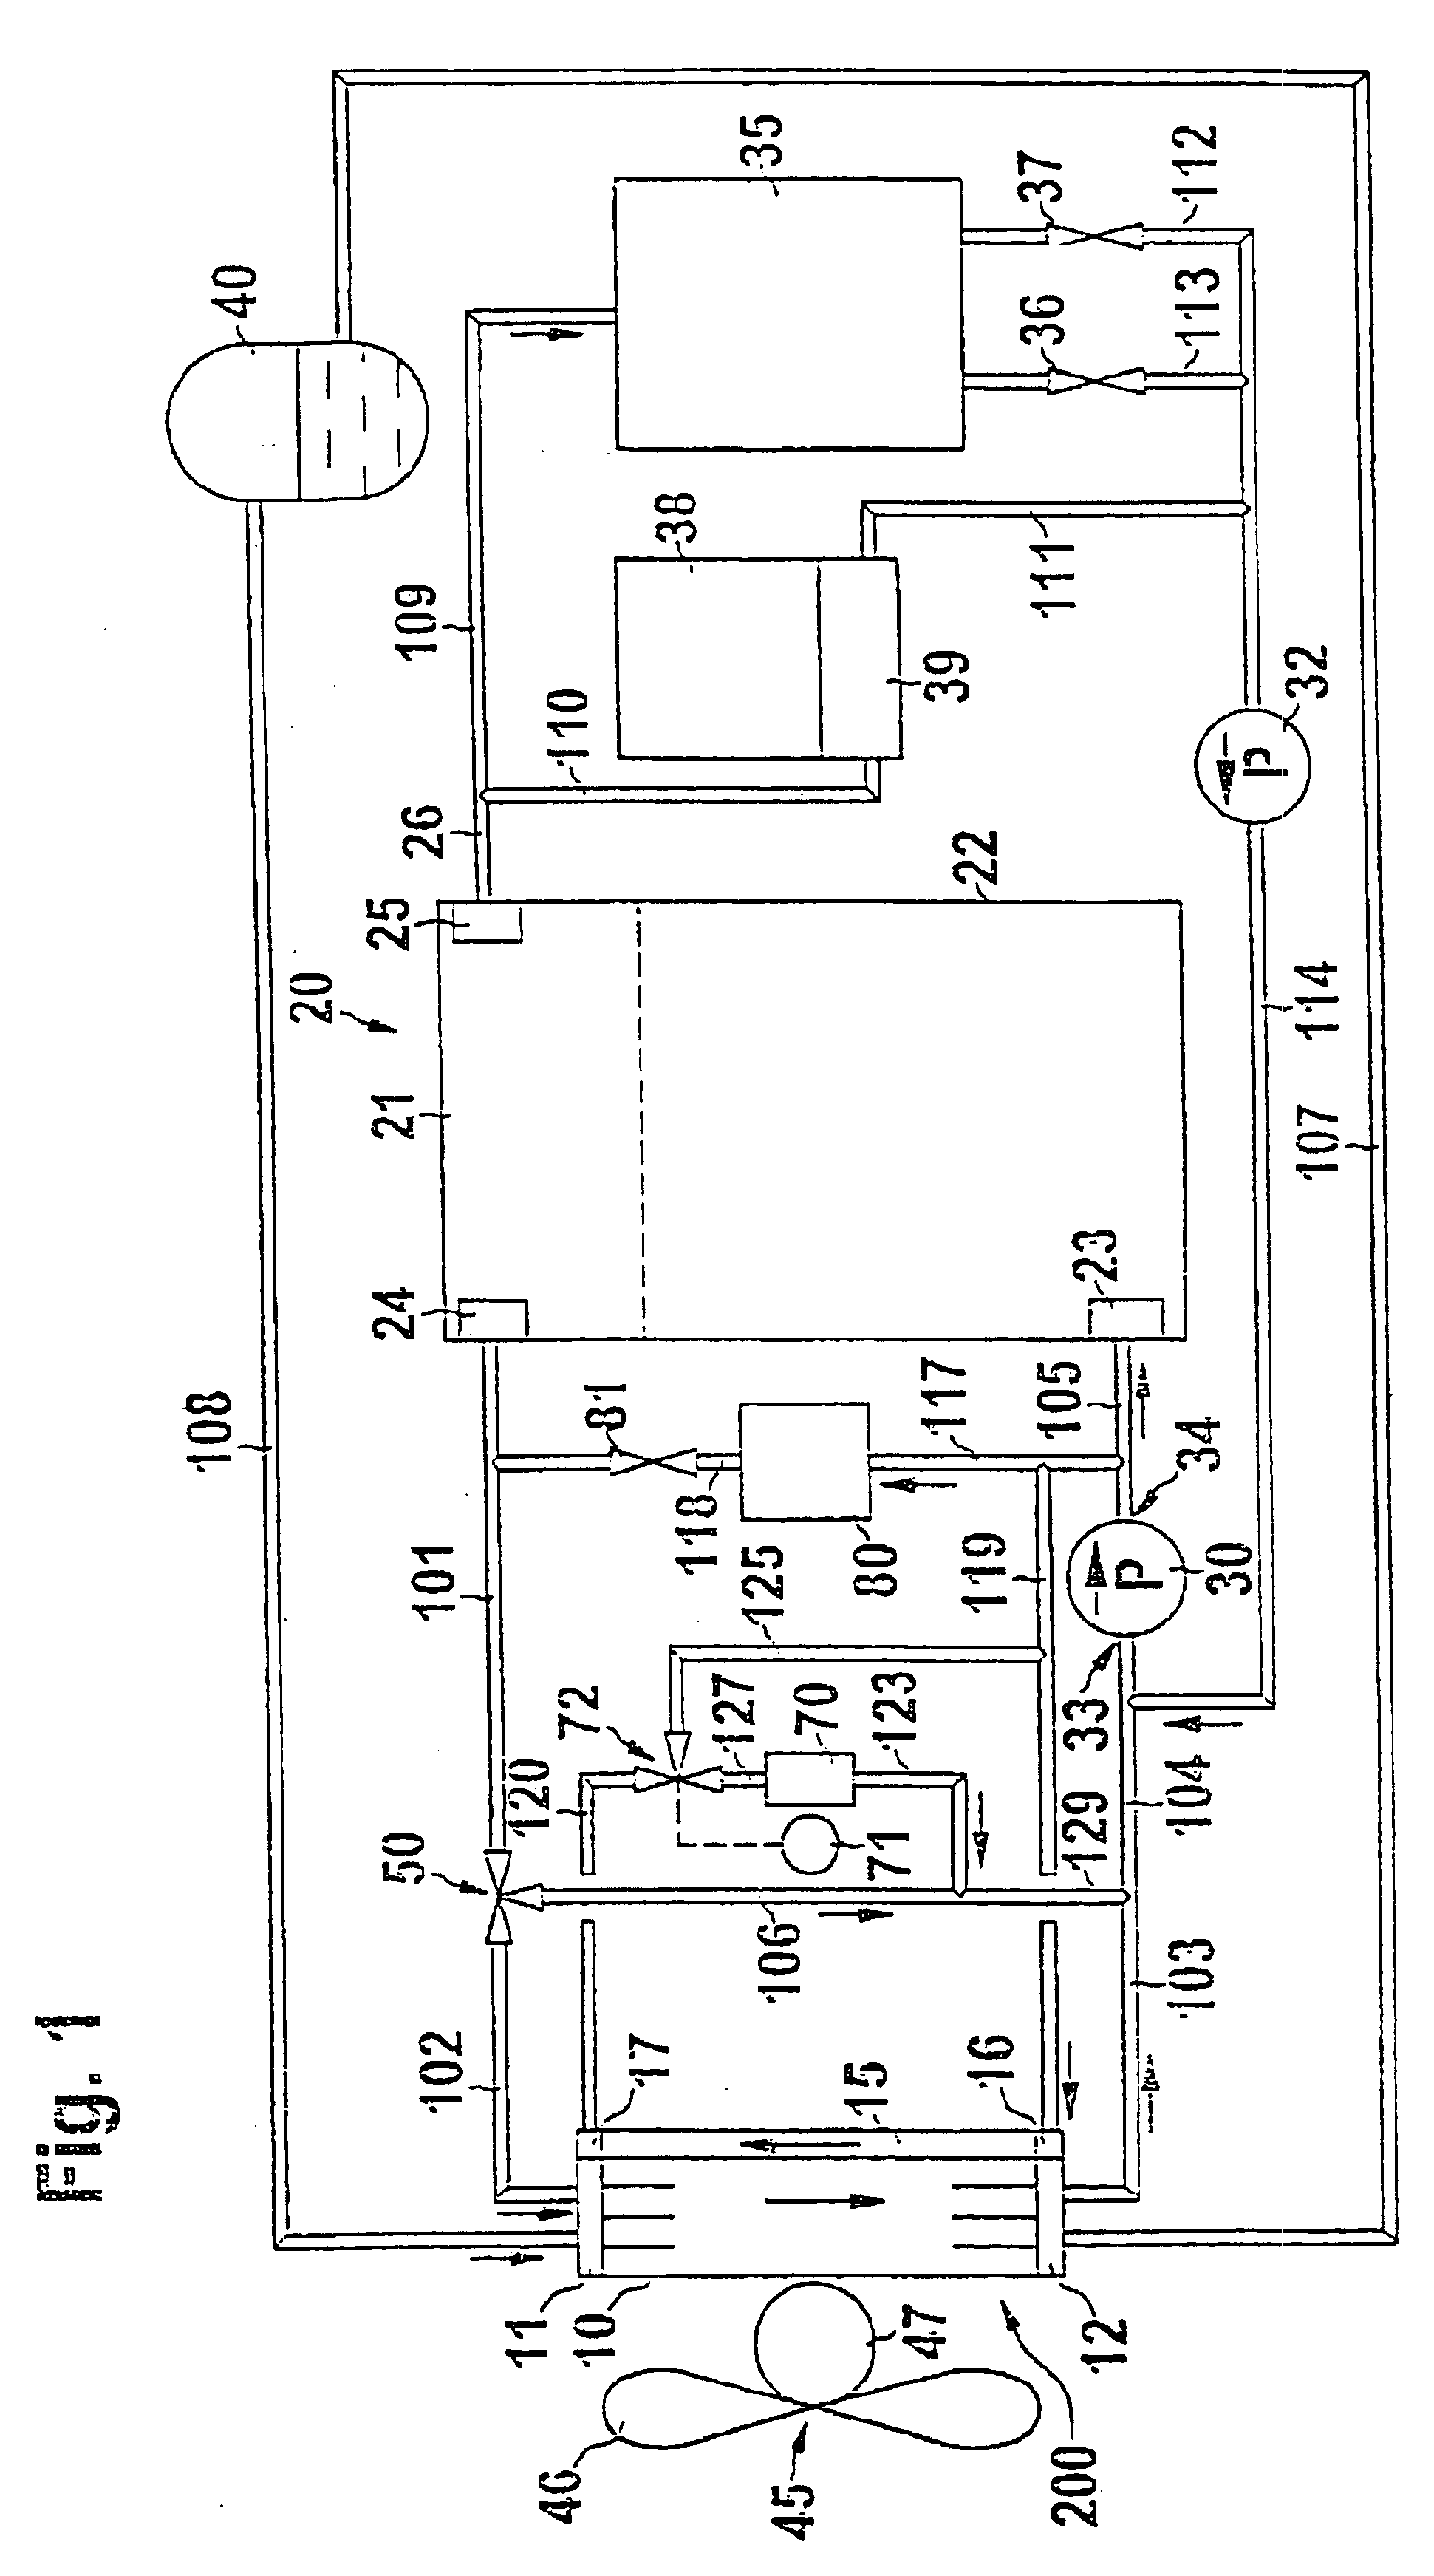 Device for cooling and heating a motor vehicle